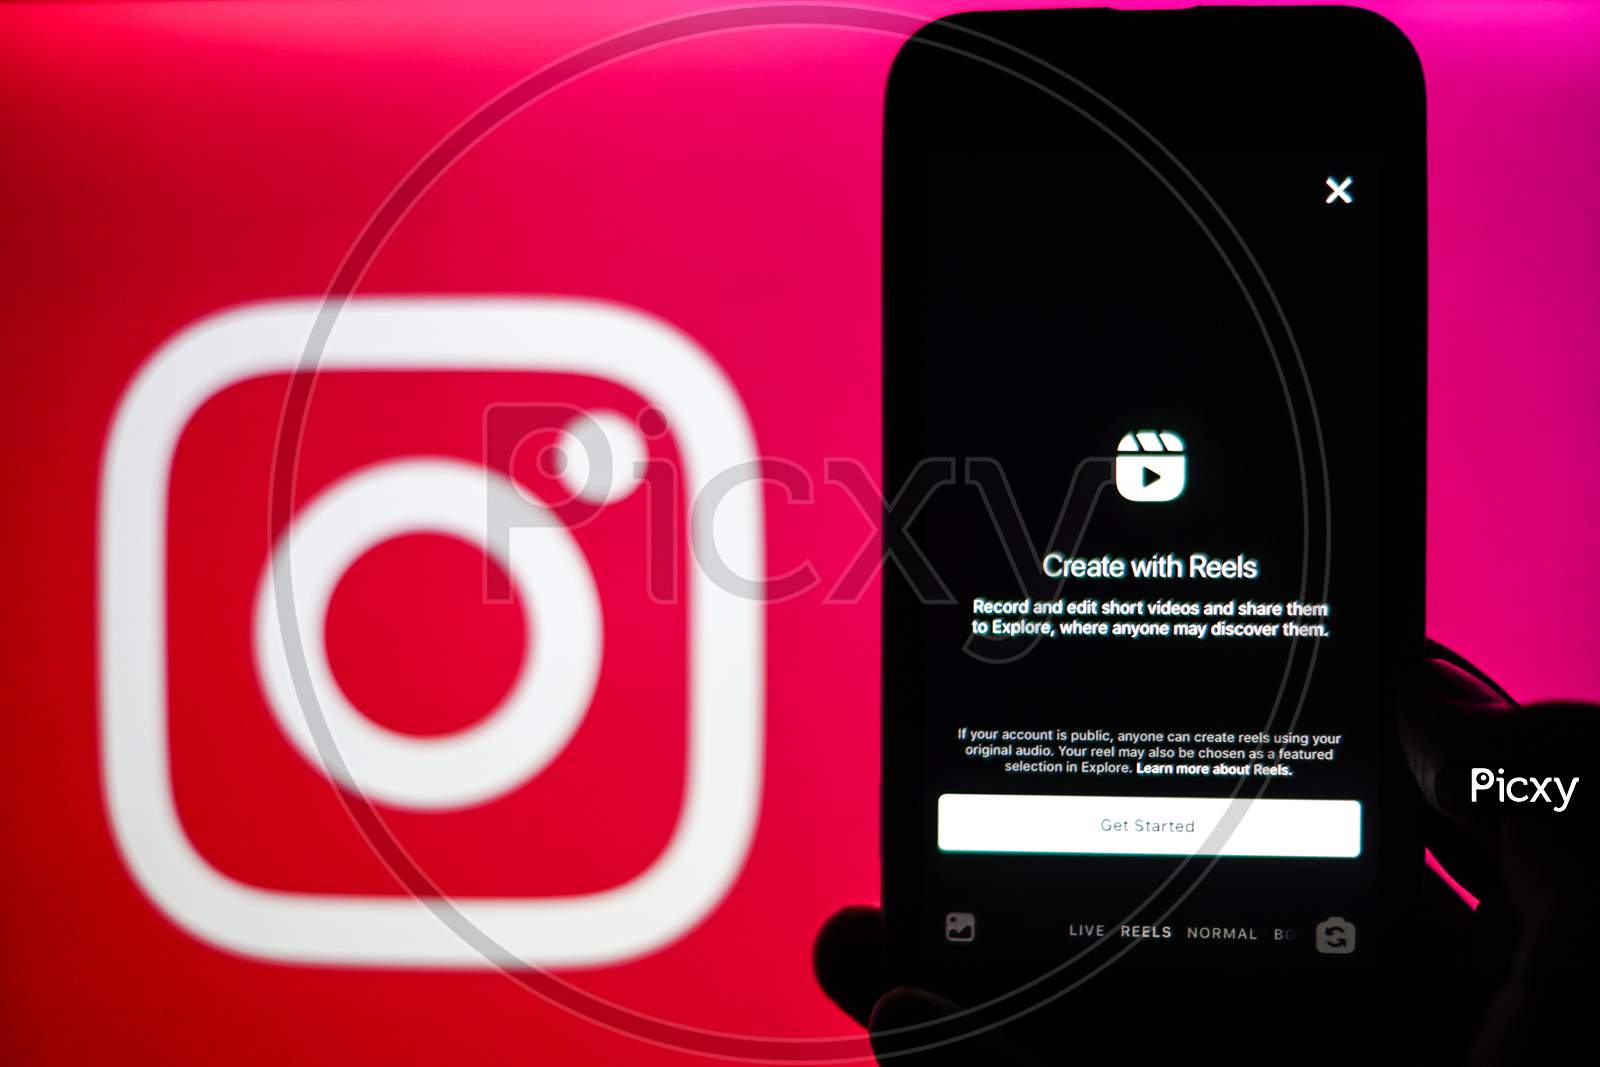 Instagram new update Instagram Reels Start Guide on a Mobile Screen with Instagram logo in the background